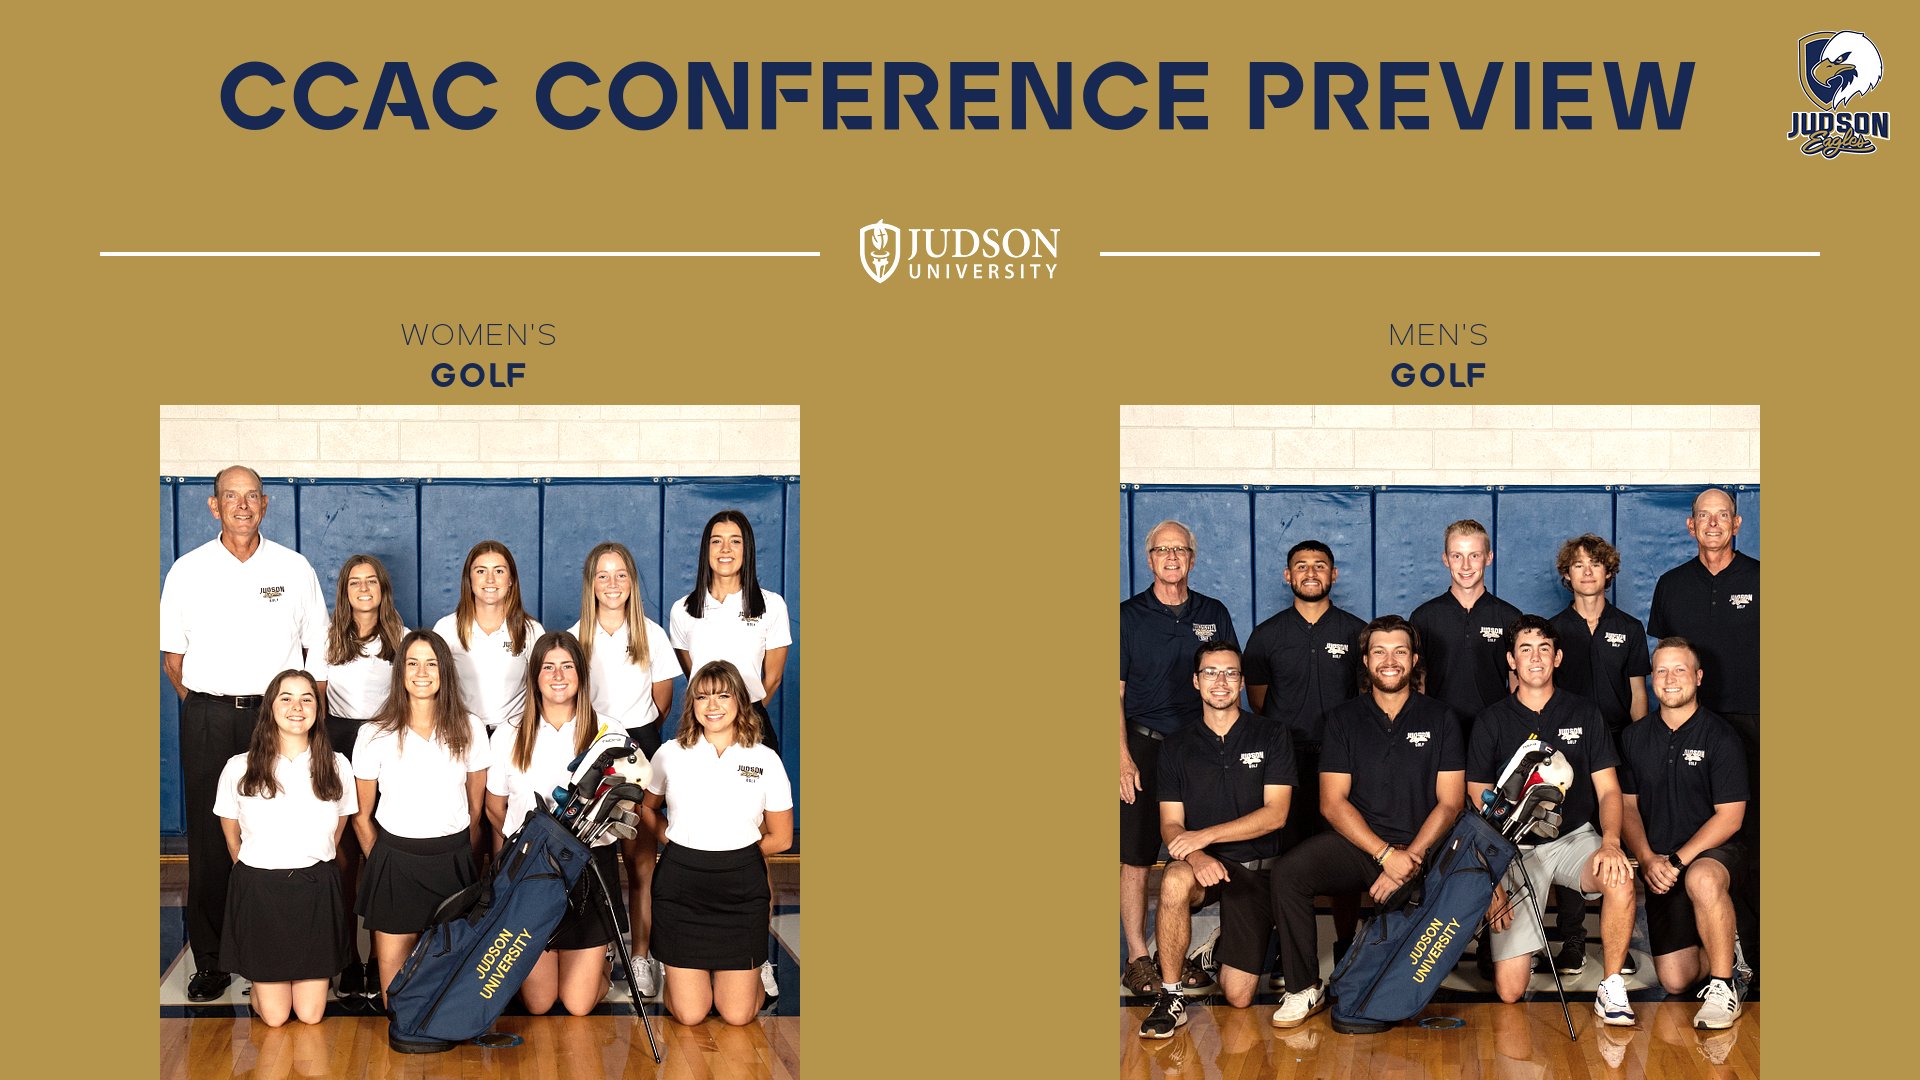 Judson Golf Completes Fall Competition at CCAC Conference Preview